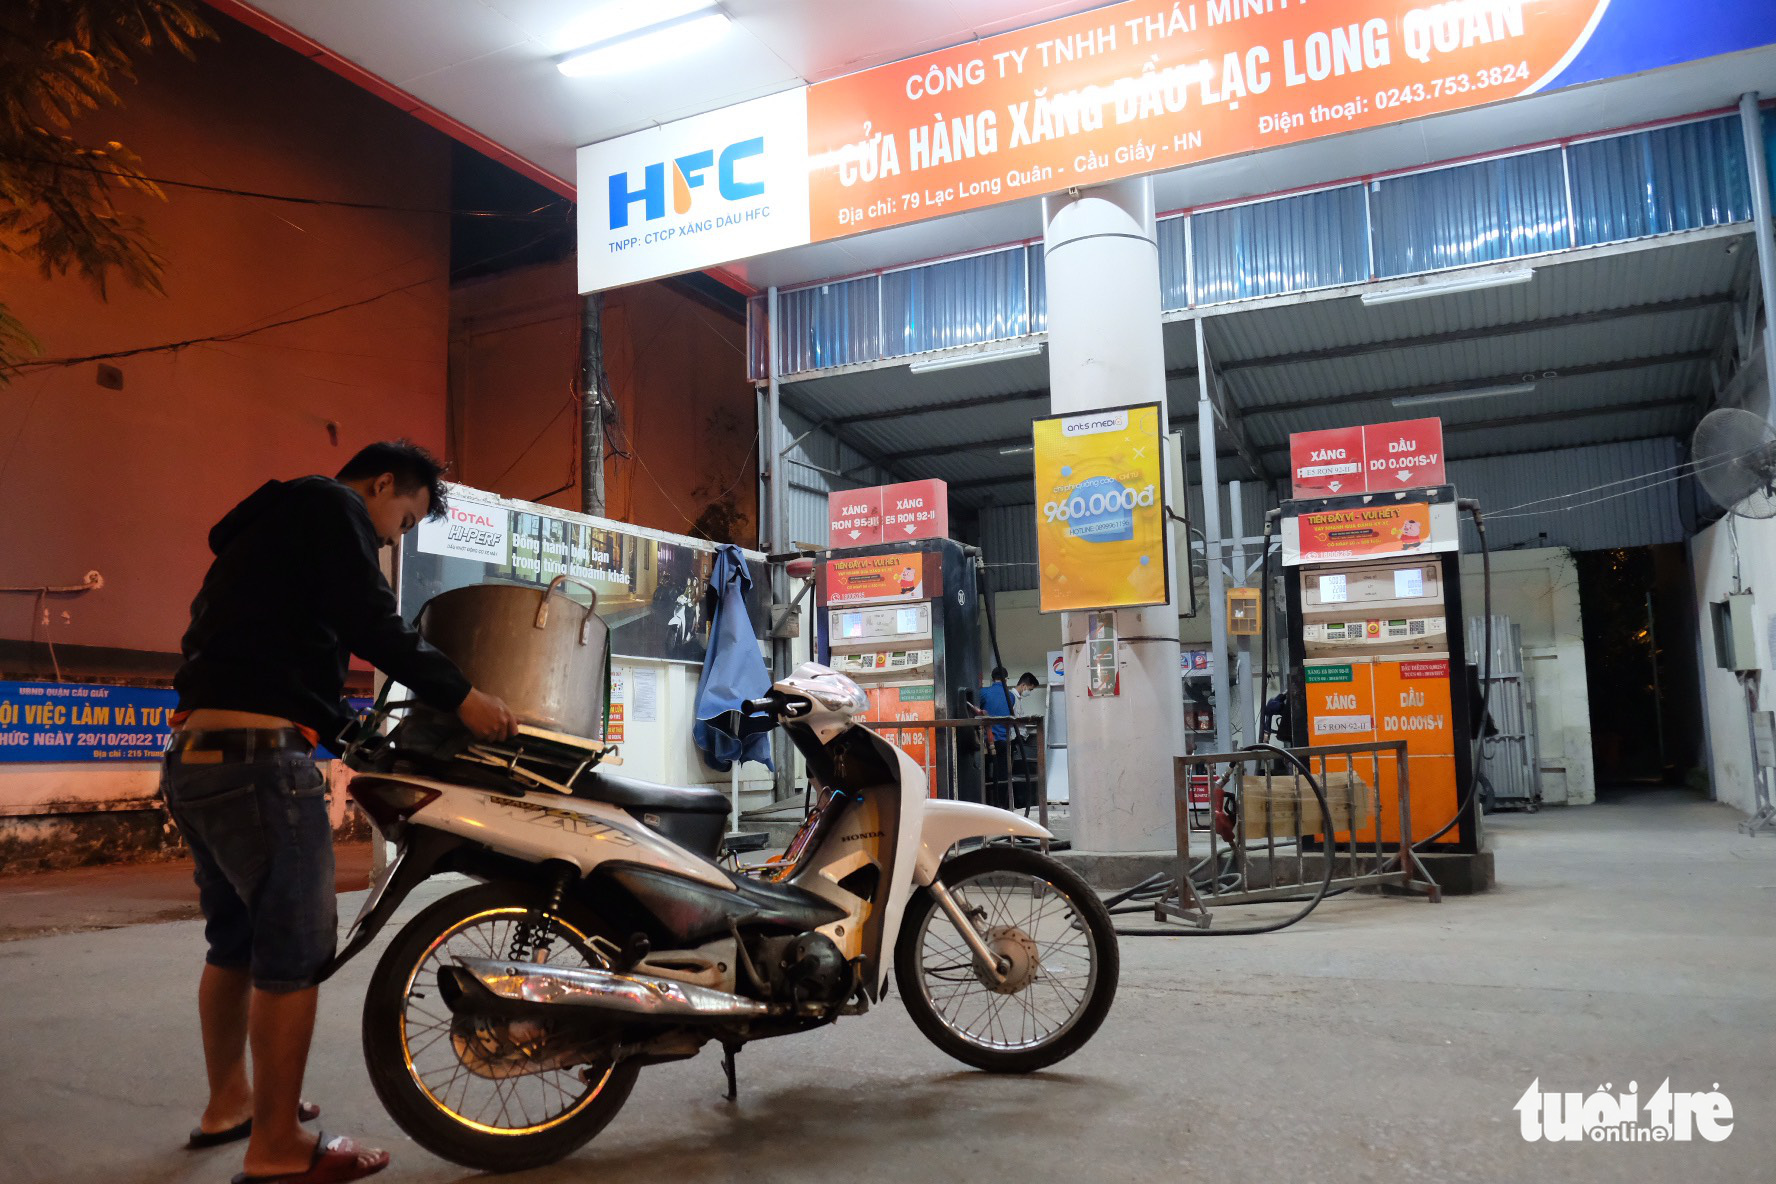 Nguyen Tuan took a motorbike that ran out of gasoline to Lac Long Quan petrol station and waited in line for about 30 minutes, but when it was almost his turn, the staff announced that the station ran out of stock. ‘Waiting for 30 minutes just to hear such an announcement, I was very disappointed and annoyed. My bike ran out of gas while buying gas is as difficult as buying gold these days. Now I have no choice but to call my wife to pick me up,’ Tuan said on the night of November 4, 2022. Photo: Tuoi Tre